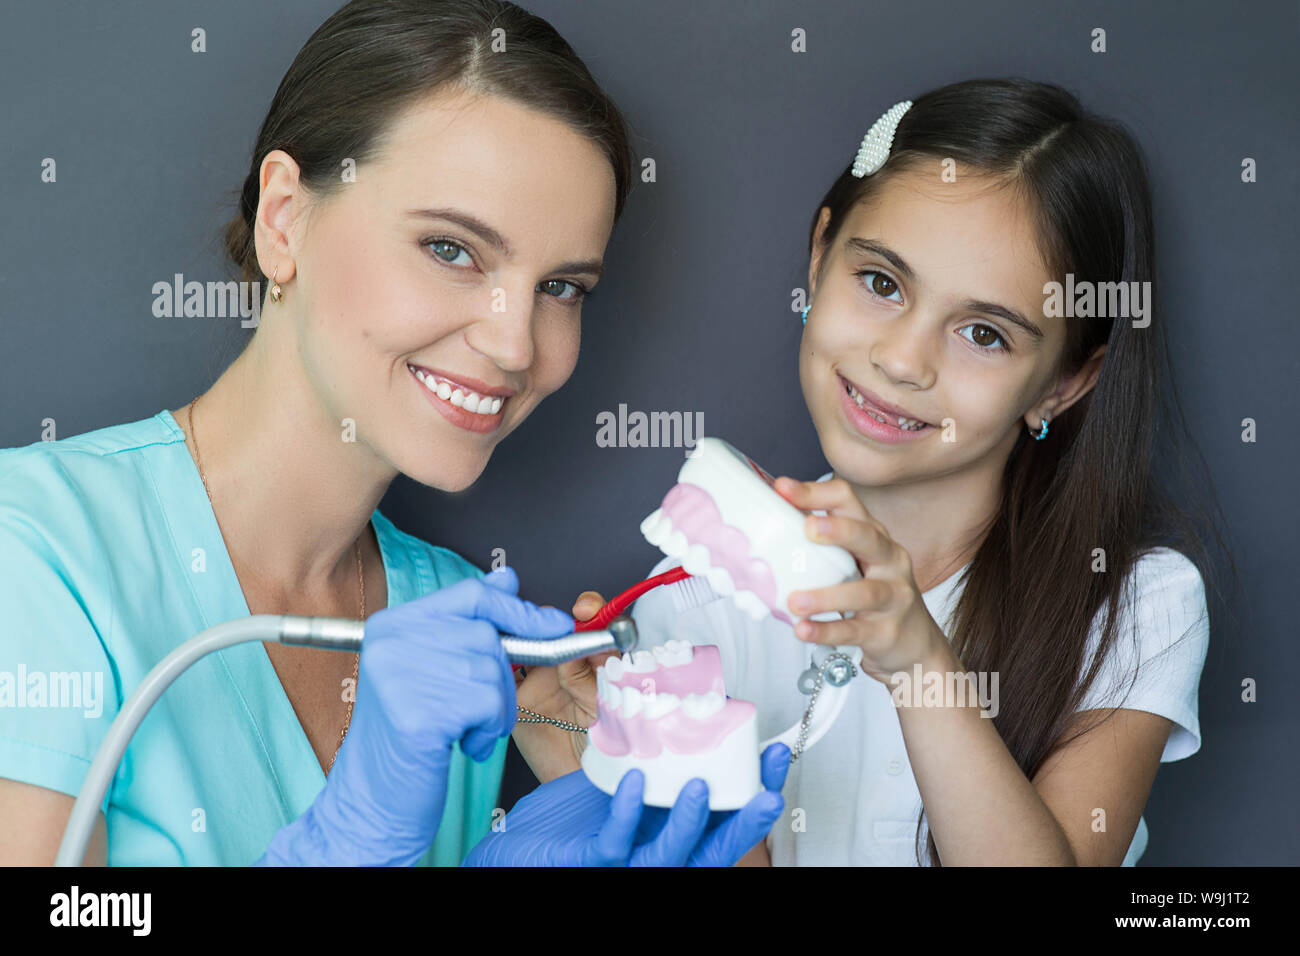 pediatric dentist and mixed race little girl having fun with dental drill and teeth model. Child Teeth treatment Stock Photo